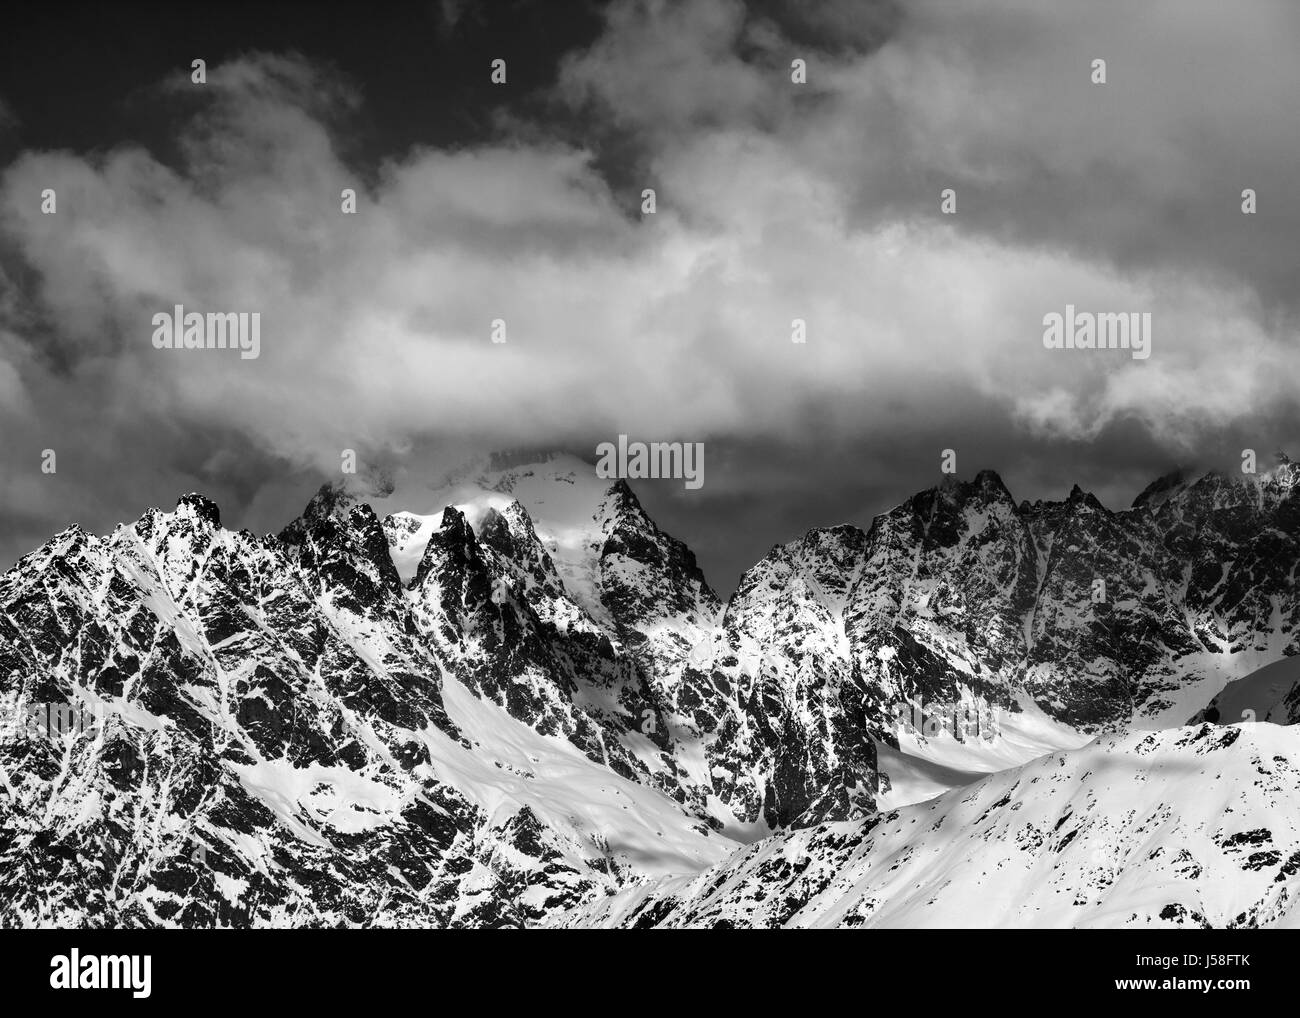 Black and white view on high snowy mountains in clouds at sunny day. Caucasus Mountains. Georgia, region Svaneti. Stock Photo